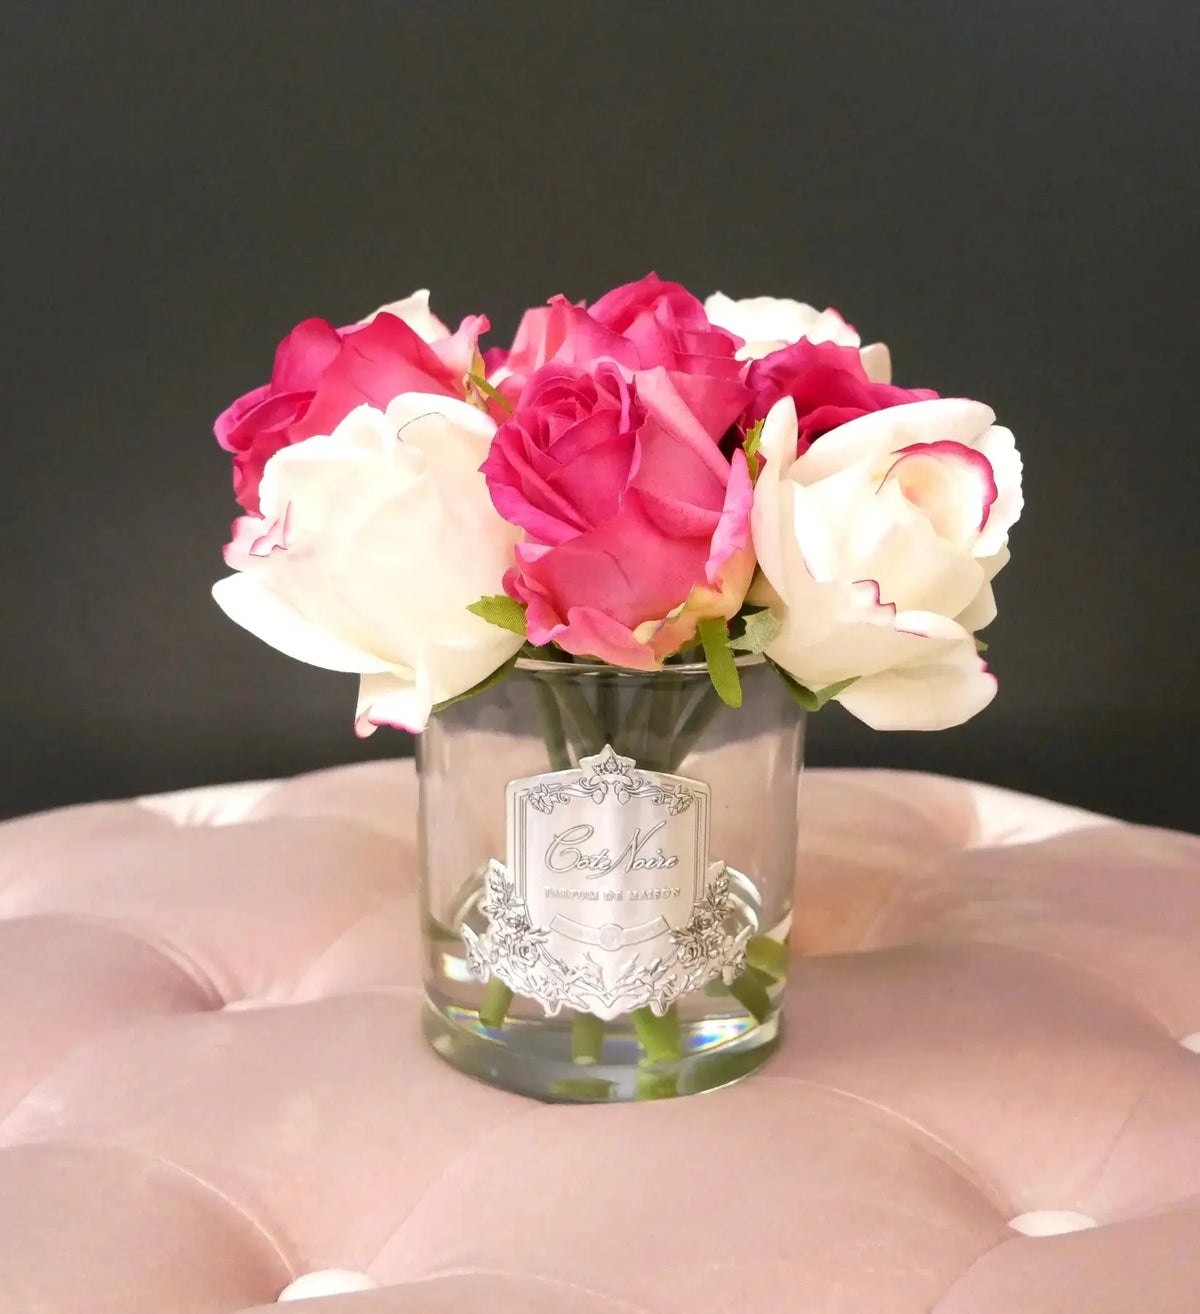 Mixed Magenta & Blush Rose Buds Bouquet - Clear Glass -  Cote Noire -  Armani Gallery